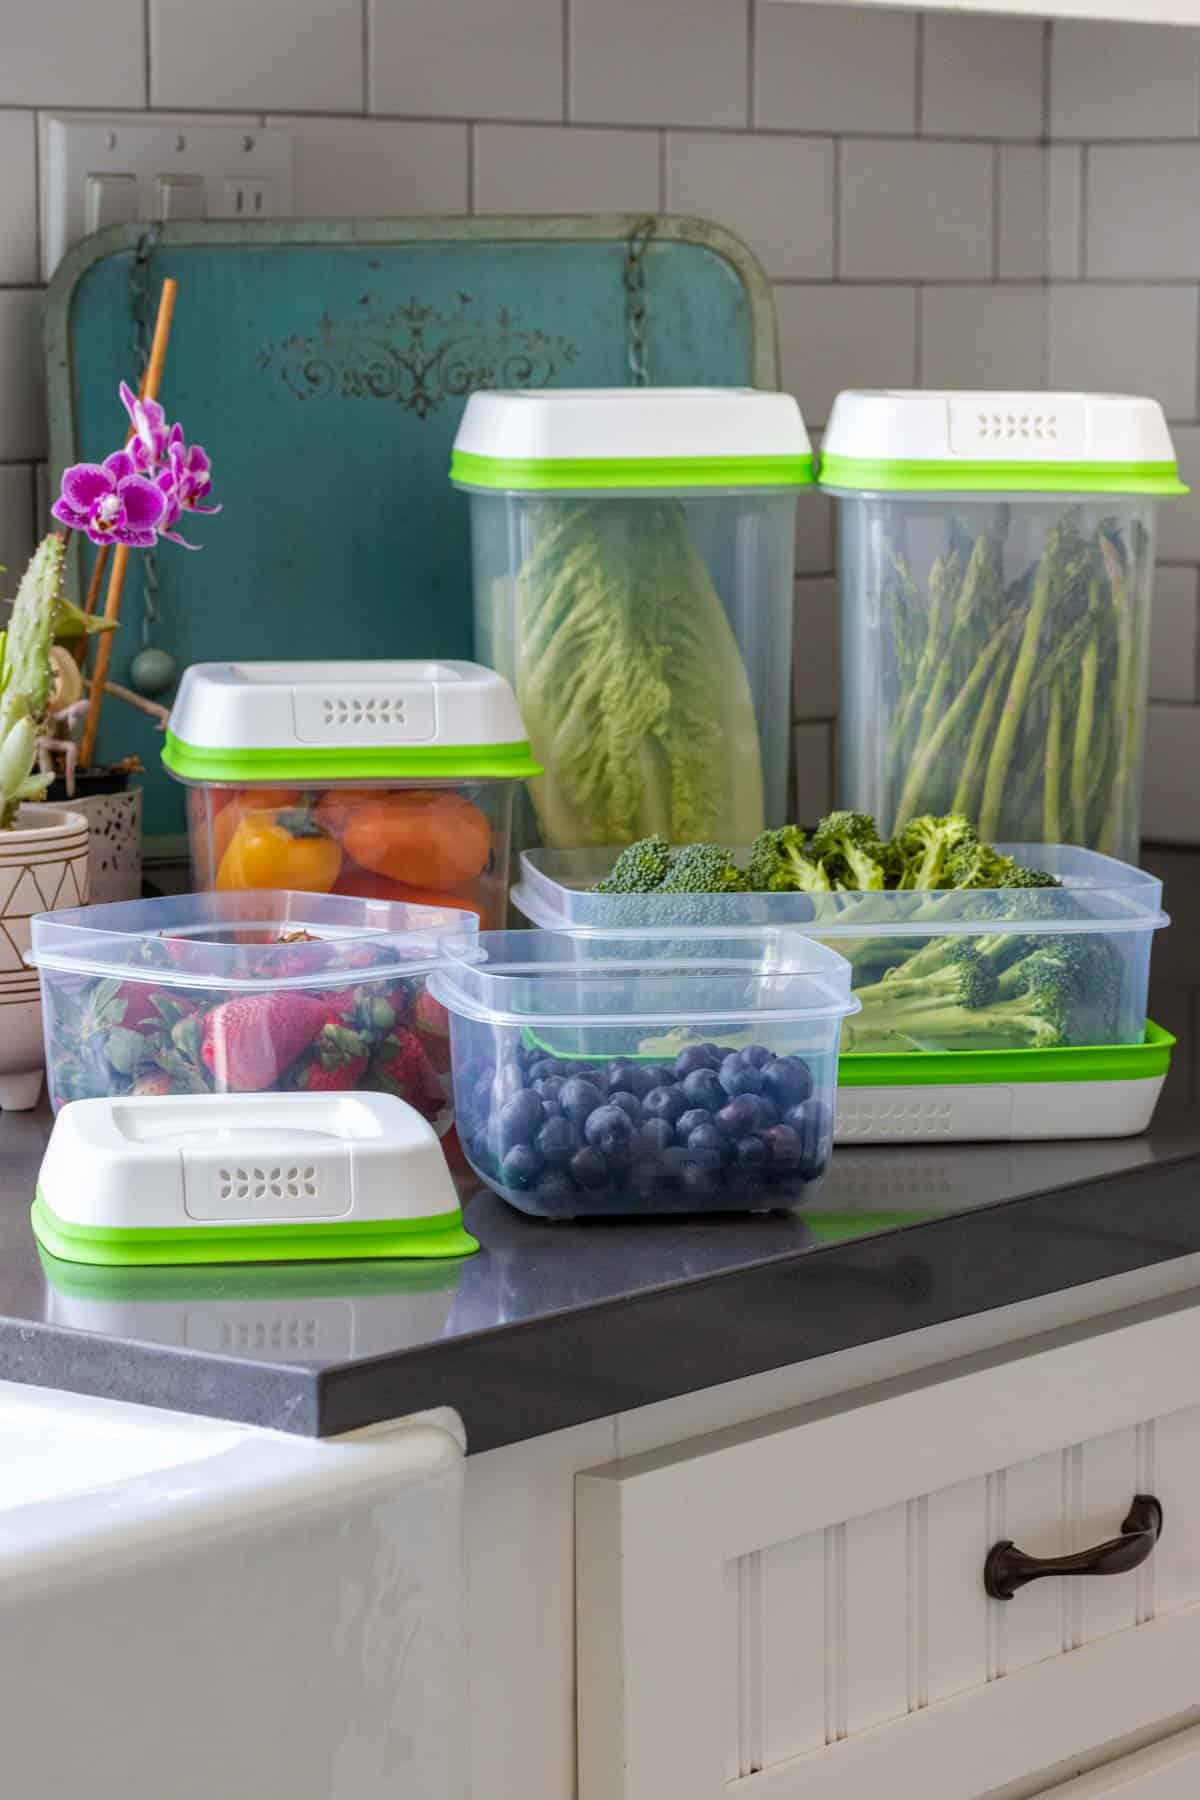 Plastic containers both open and with lids filled with fruits and veggies sitting on a countertop.